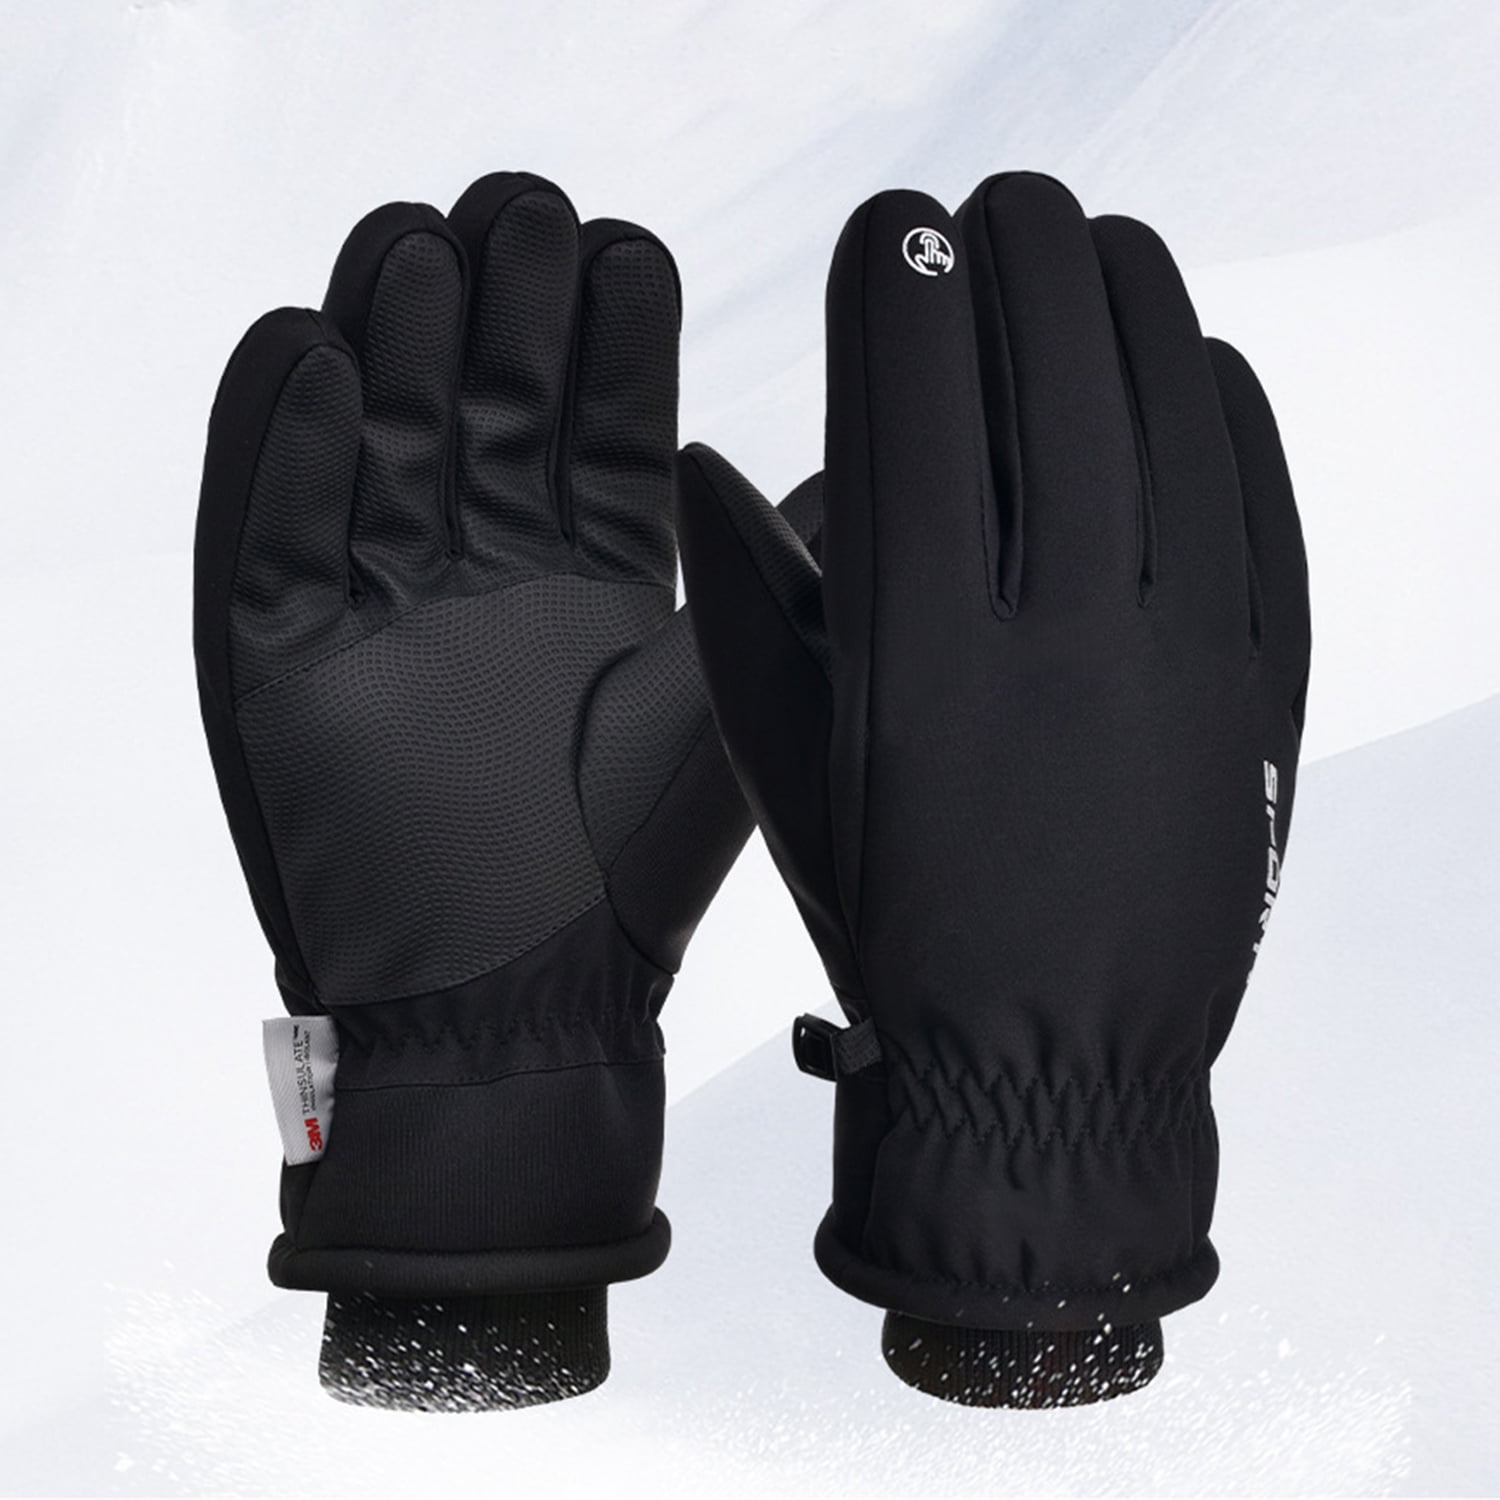 Ski -Waterproof 3M Thinsulate Work & Gloves for Snow Removal, Skiing, Snowboarding, and Snowmobile, Outdoor Work and Workout Snow Gloves for Women and Men - Walmart.com